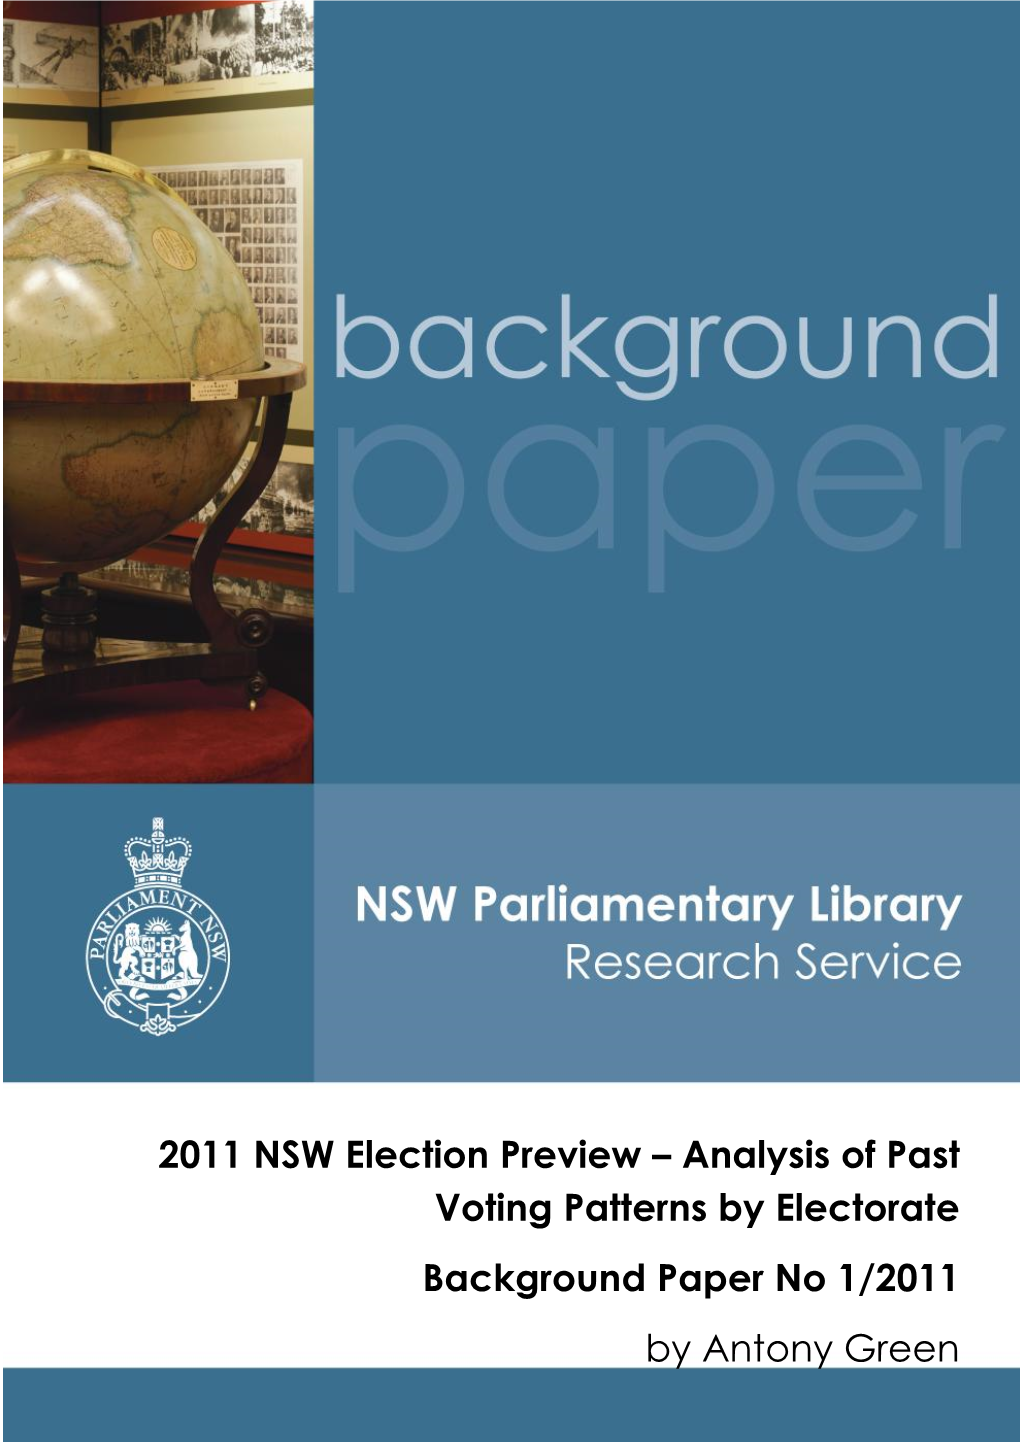 2011 NSW Election Preview – Analysis of Past Voting Patterns by Electorate Background Paper No 1/2011 by Antony Green